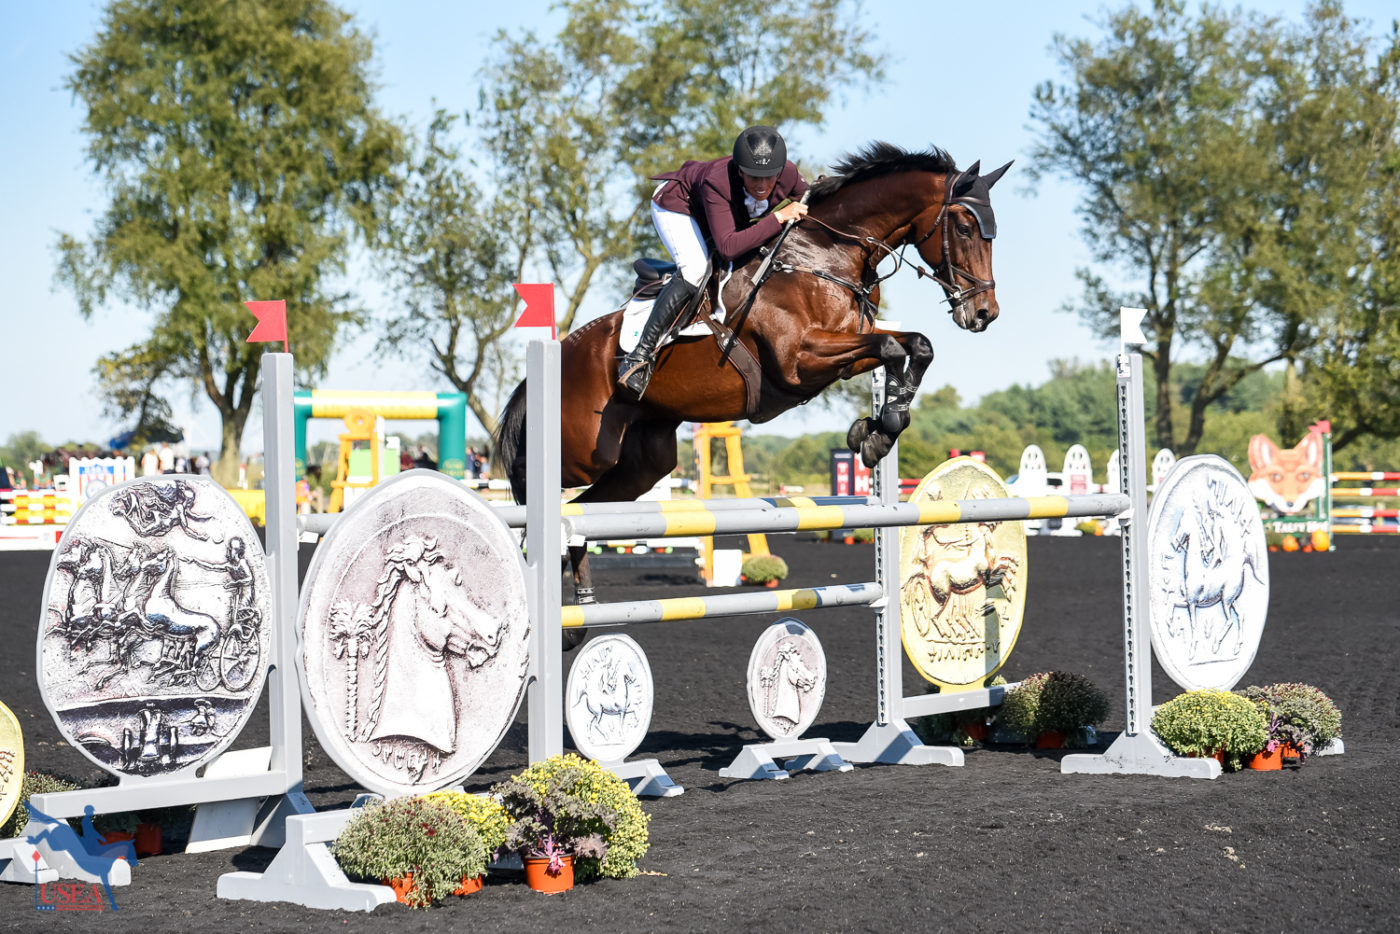 10thT - Meghan O'Donoghue and Palm Crescent - 34.3